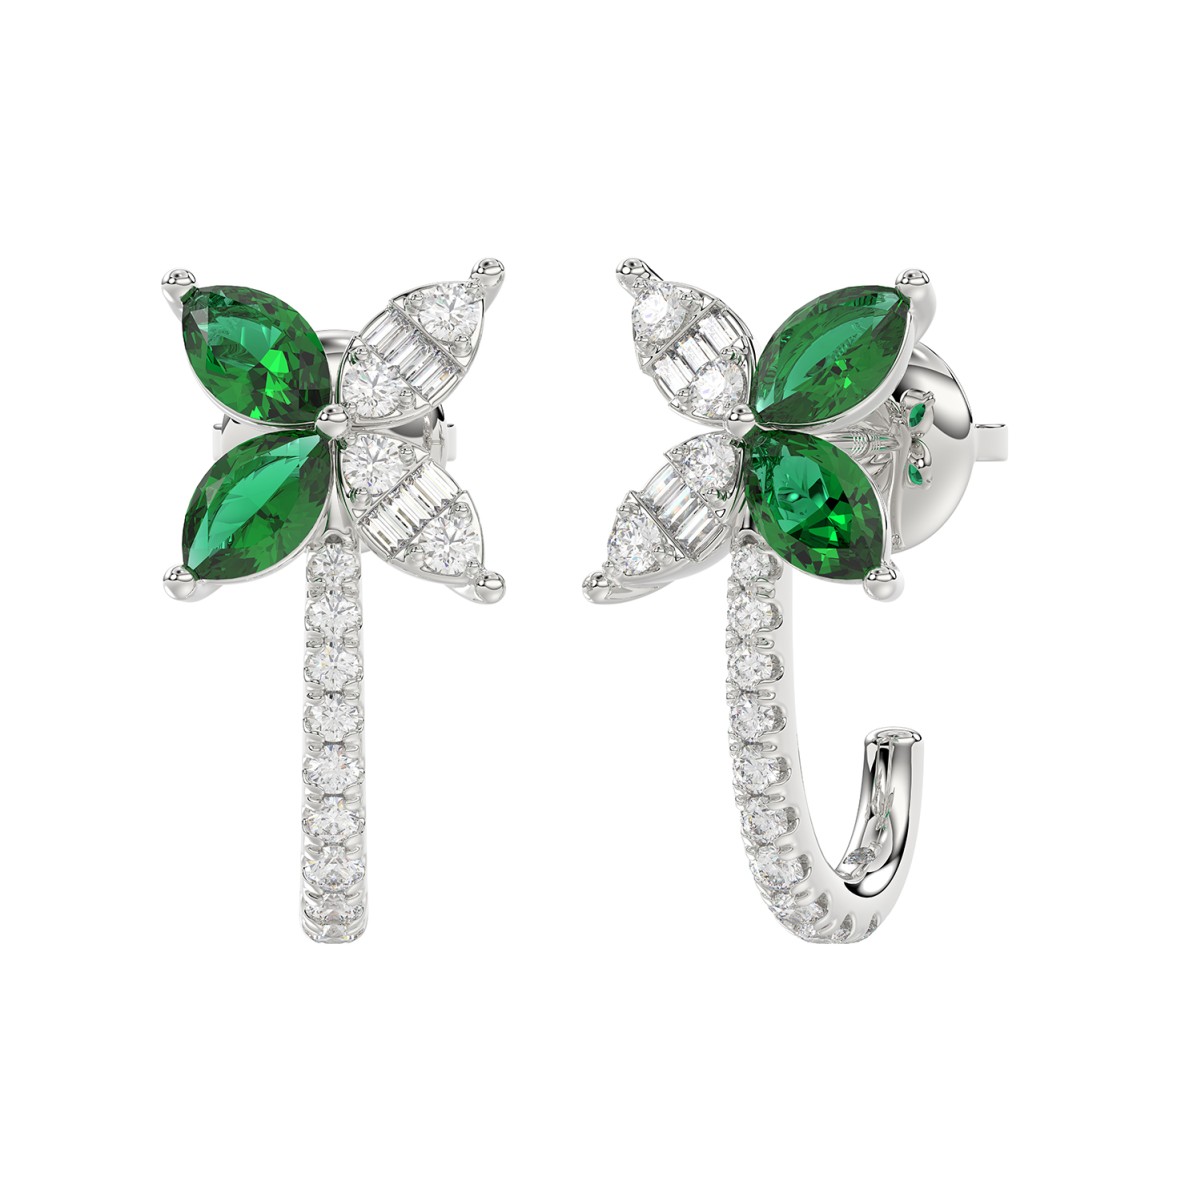 14K WHITE GOLD 1/3CT ROUND/BAGUETTE/MARQUISE DIAMOND LADIES EARRINGS(COLOR STONE MARQUISE GREEN EMERALD DIAMOND 3/4CT)